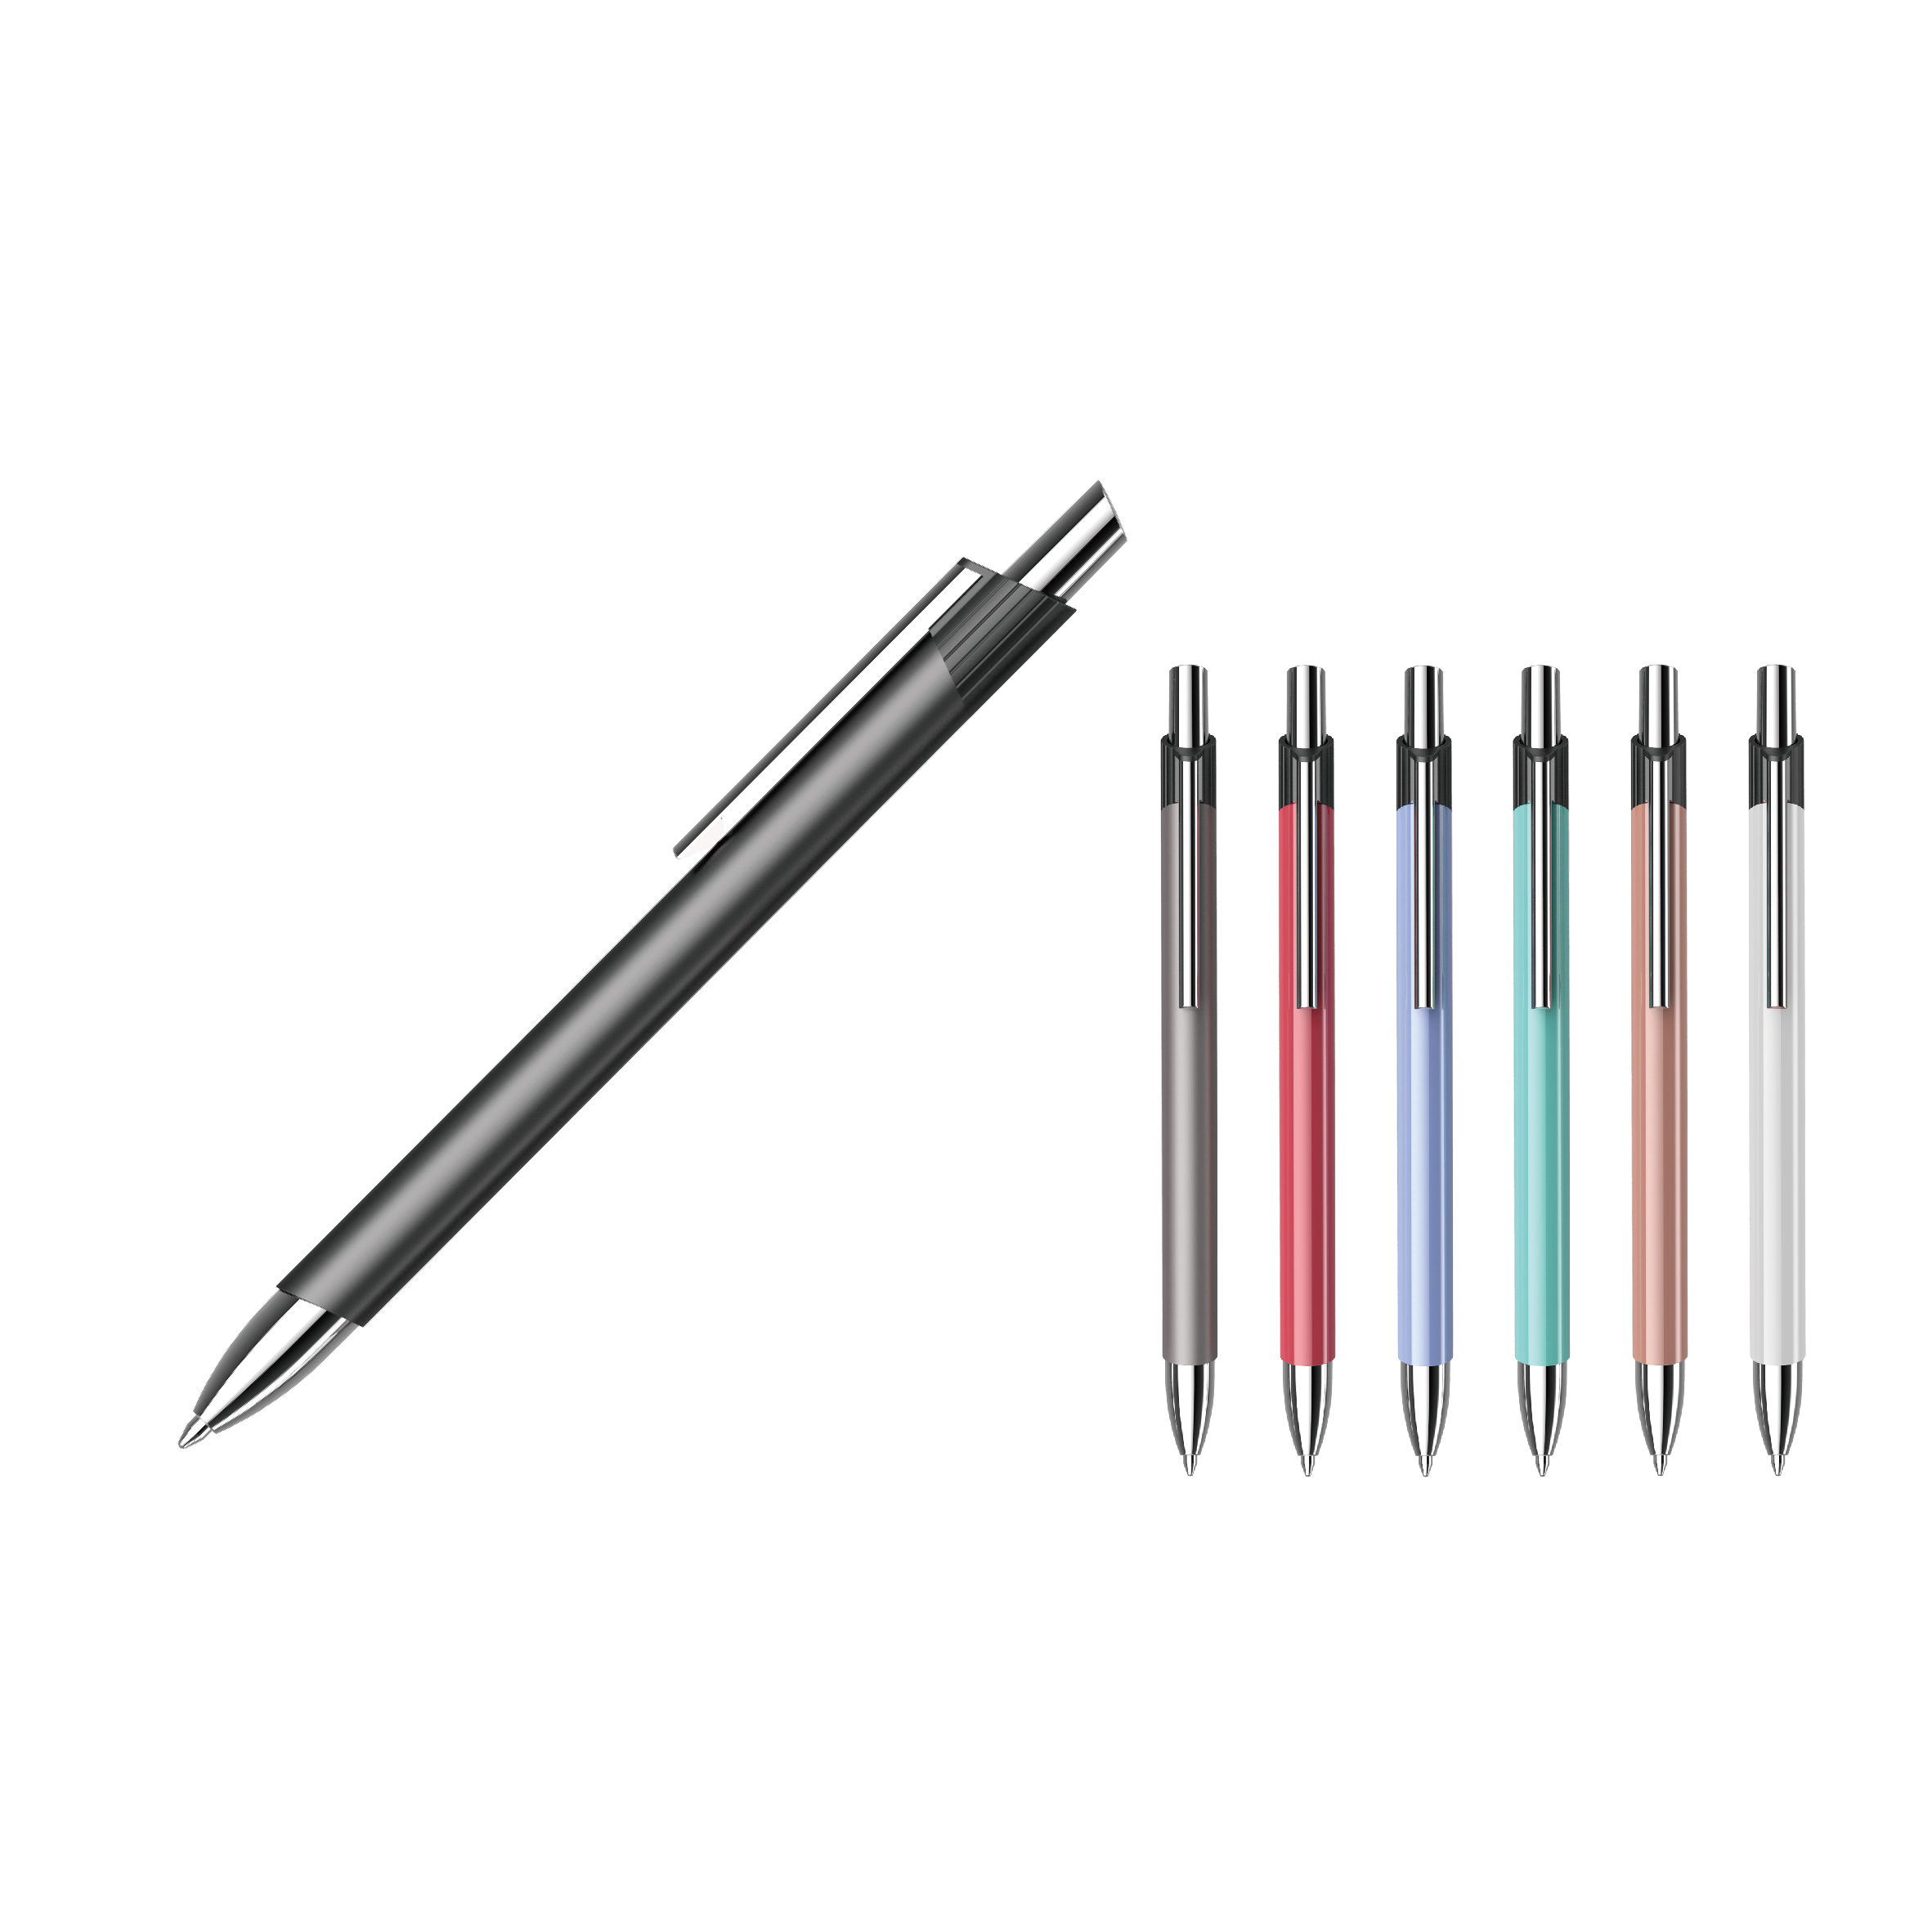 0.7mm/1.0mm Luxury Ball Point Metal Pen With Metal Pocket Clip